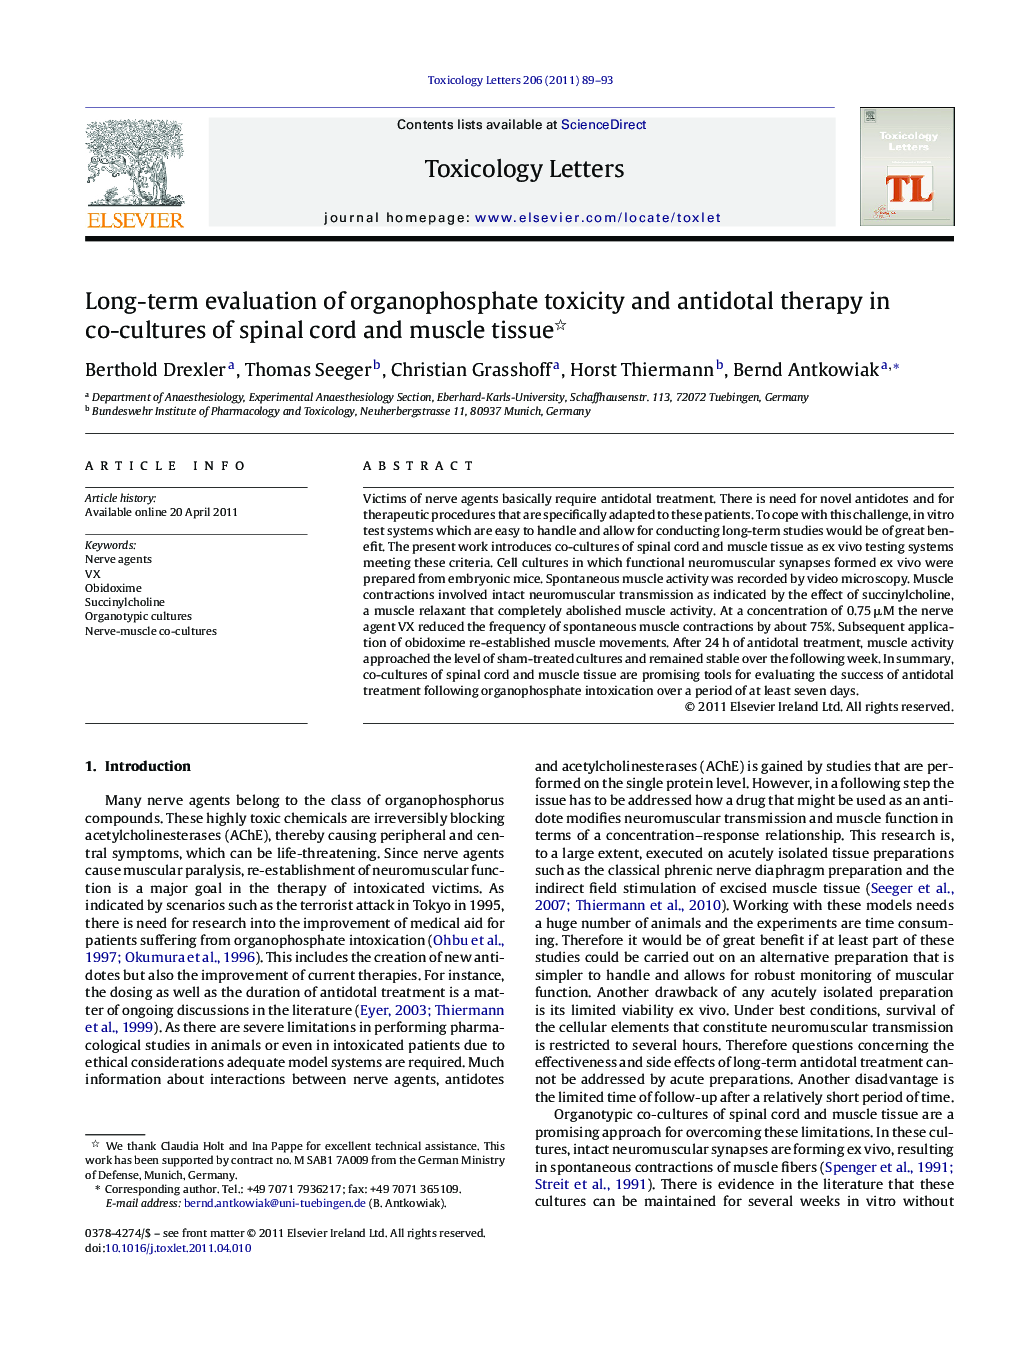 Long-term evaluation of organophosphate toxicity and antidotal therapy in co-cultures of spinal cord and muscle tissue 